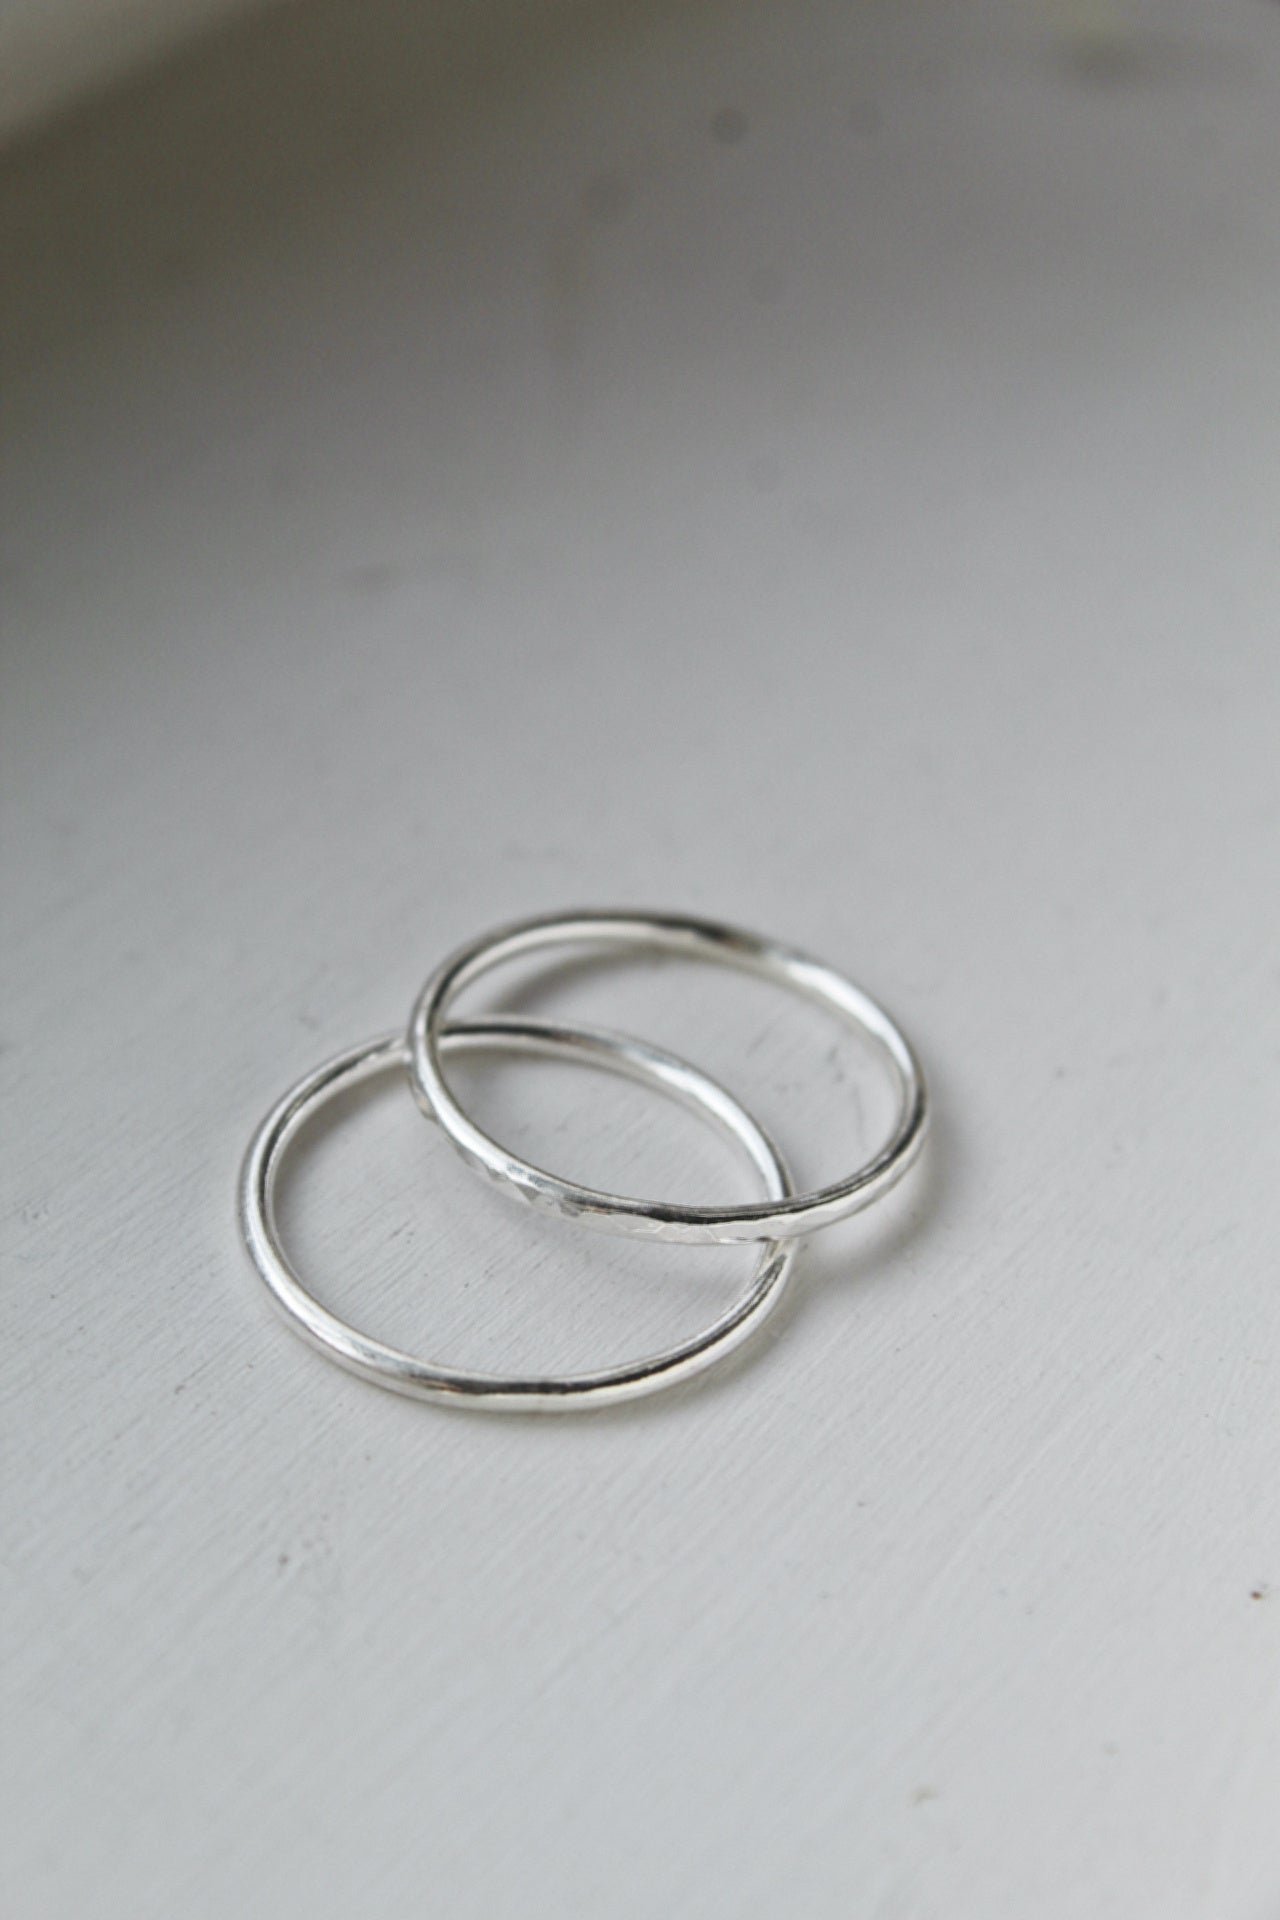 925 Sterling Silver Stacking Ring Hammered Finish - Jewellery Hut